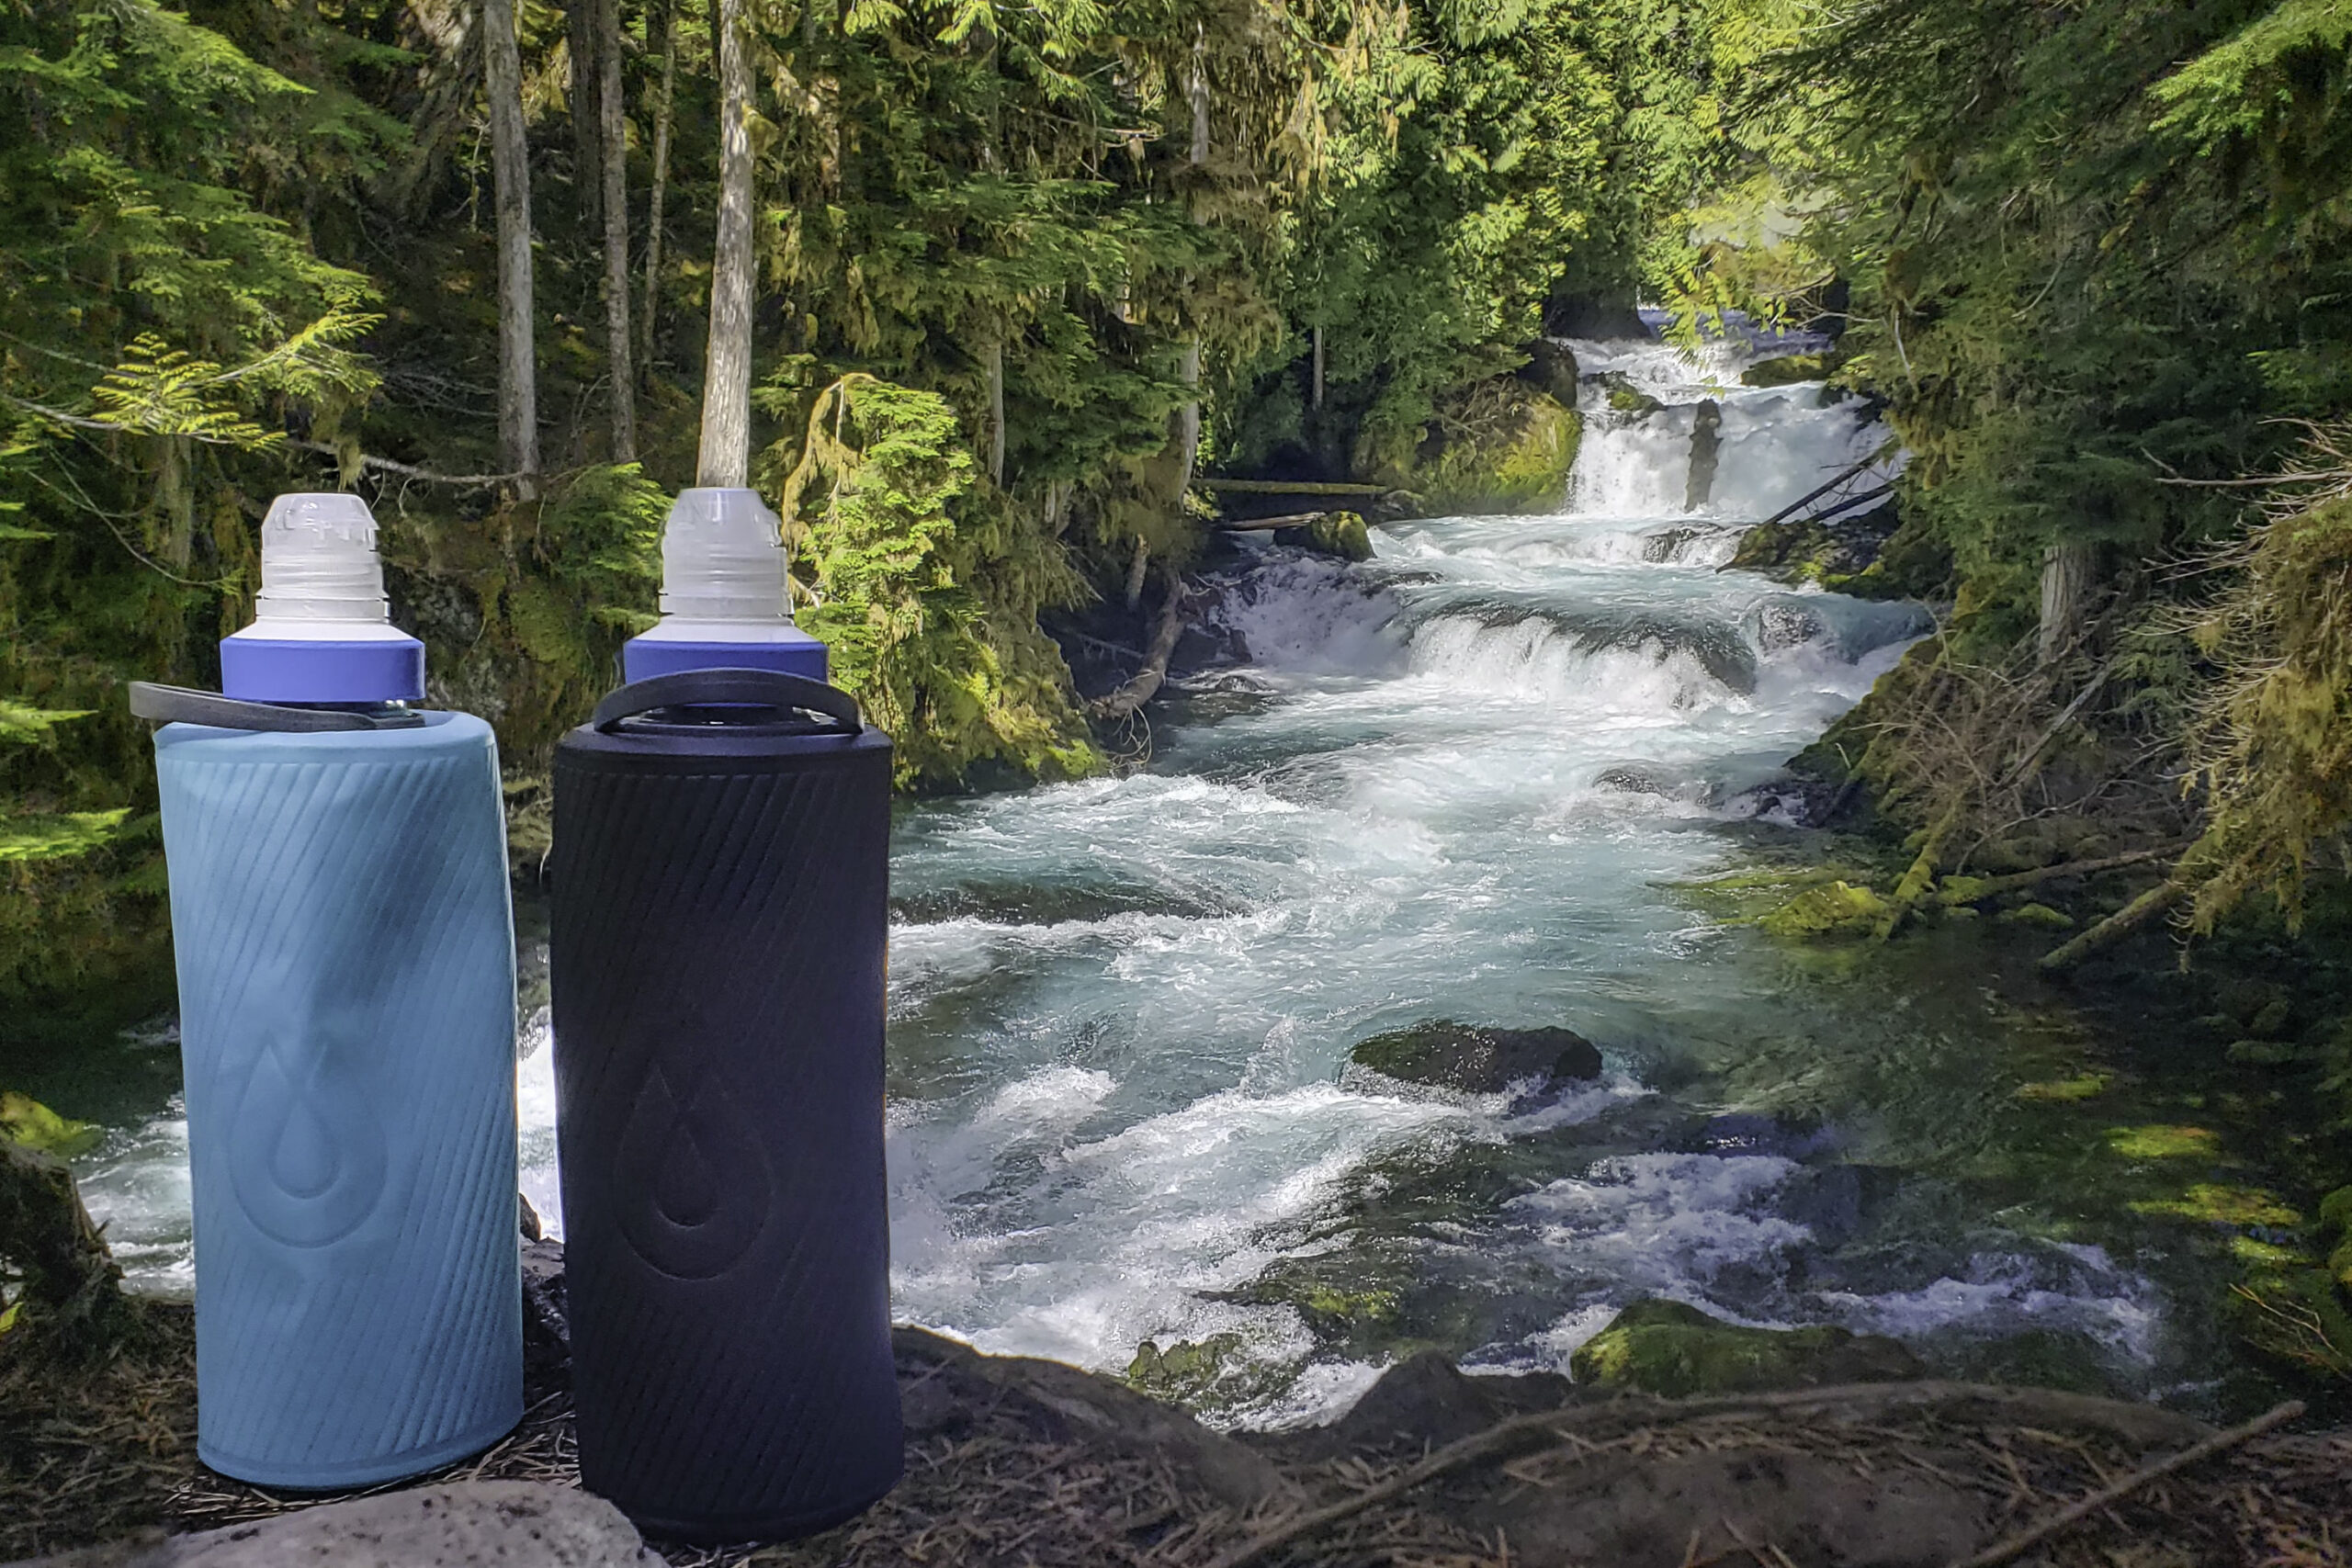 Hydrapak Flux water bottles with Katadyn BeFree water filters in front of a clear-blue river